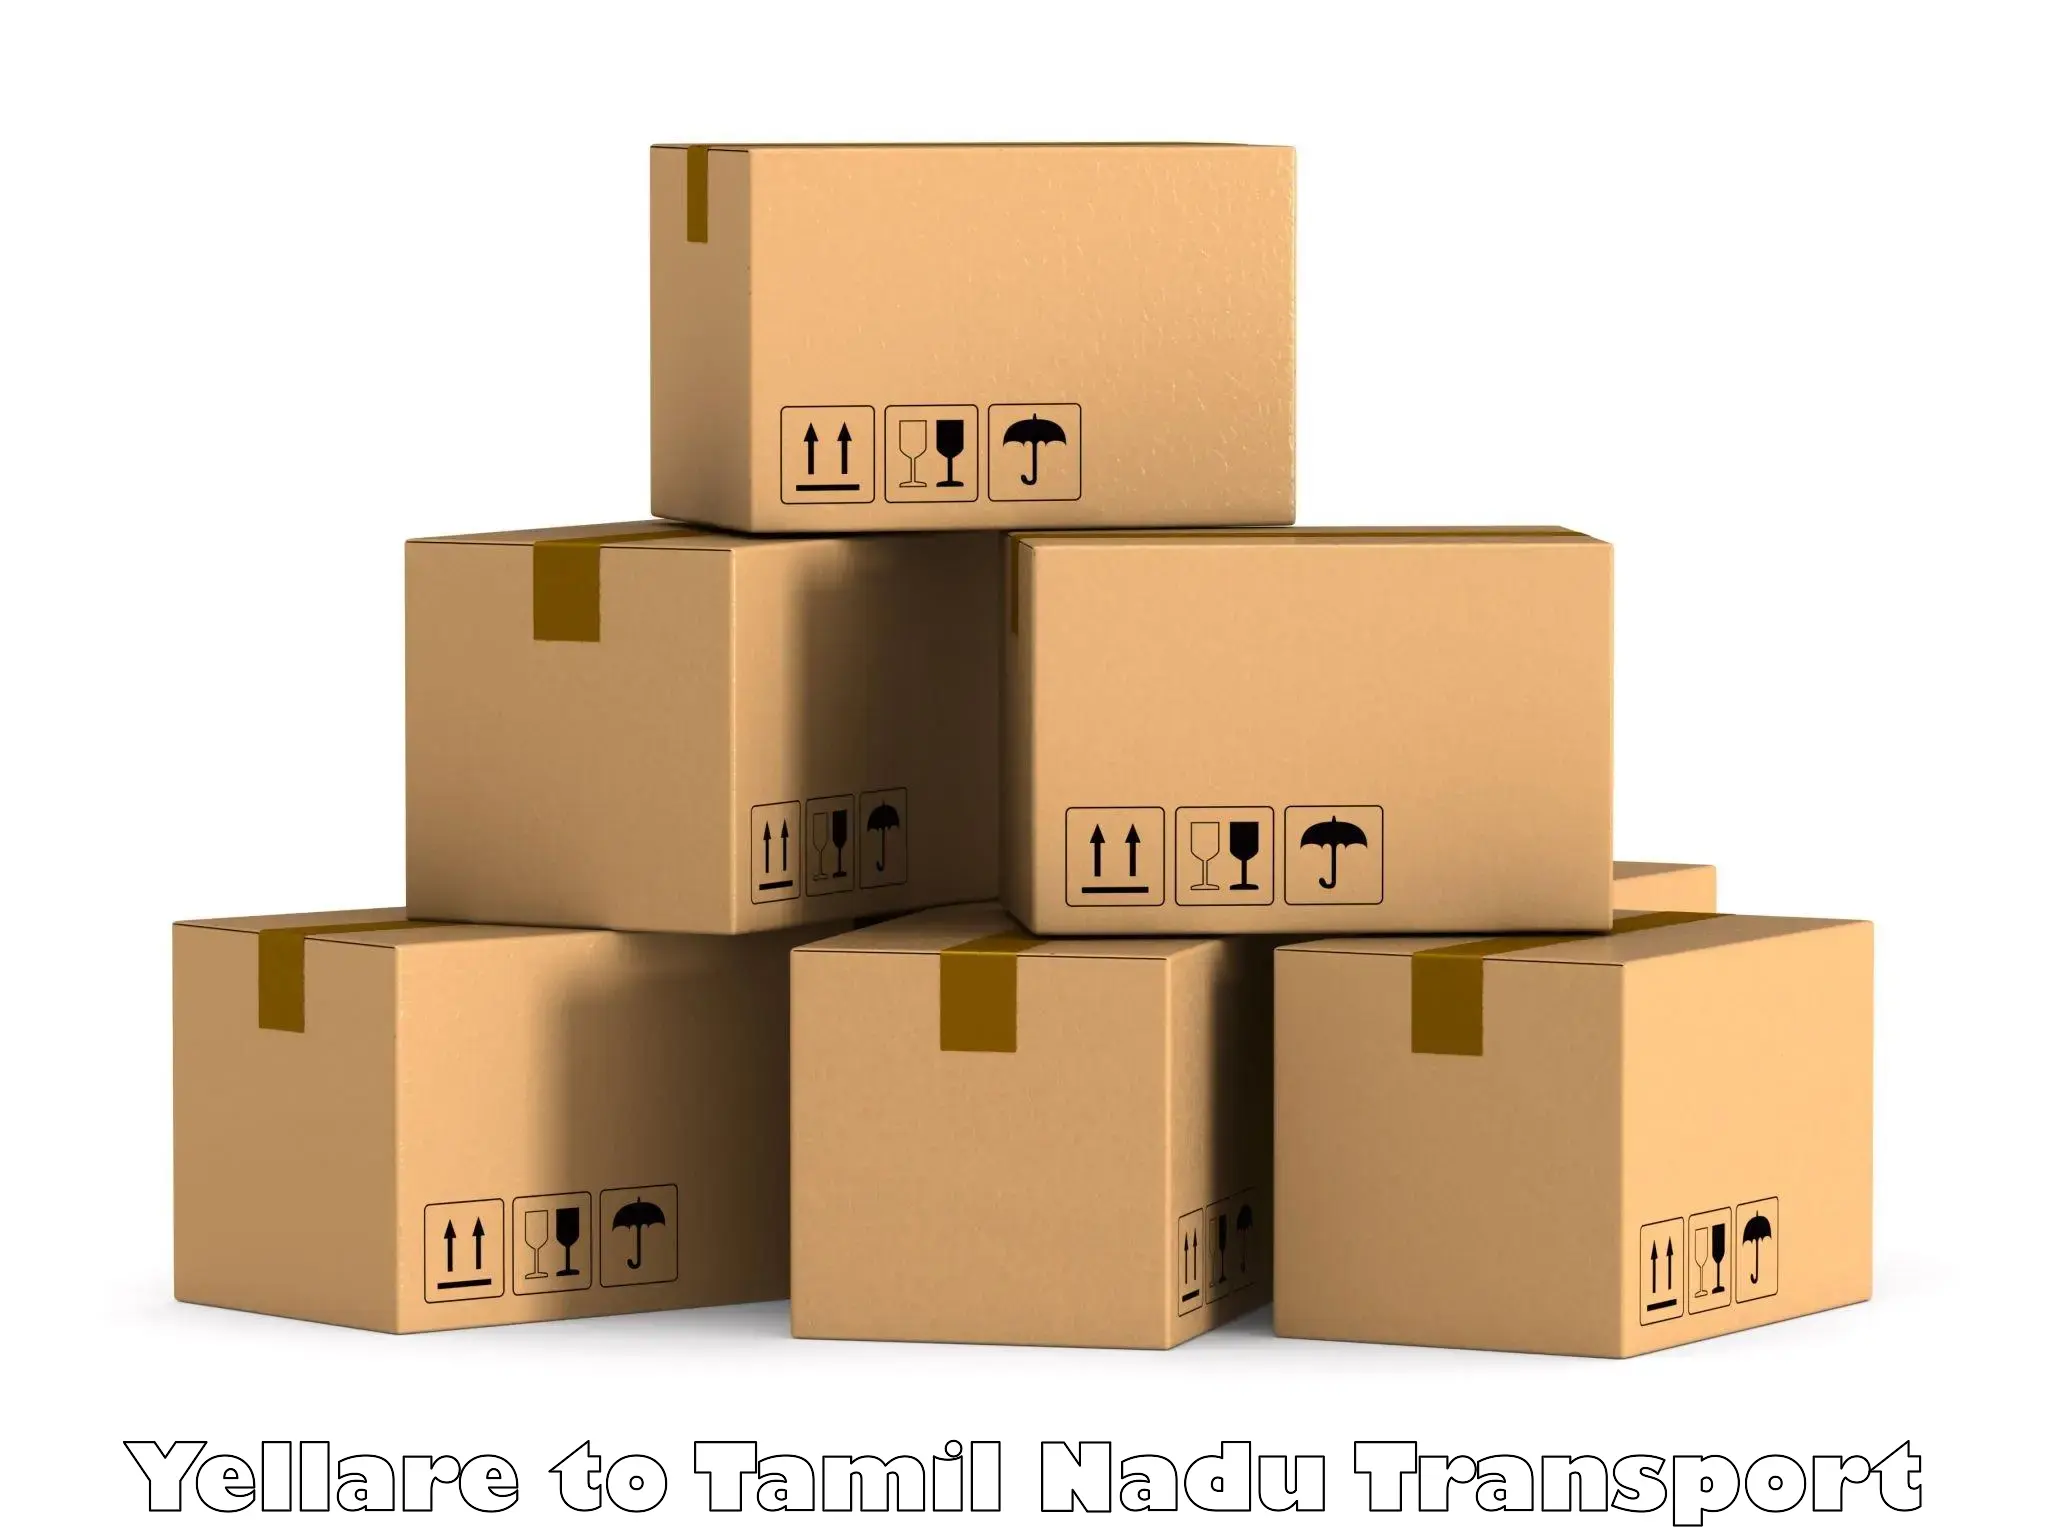 Container transportation services Yellare to Tamil Nadu